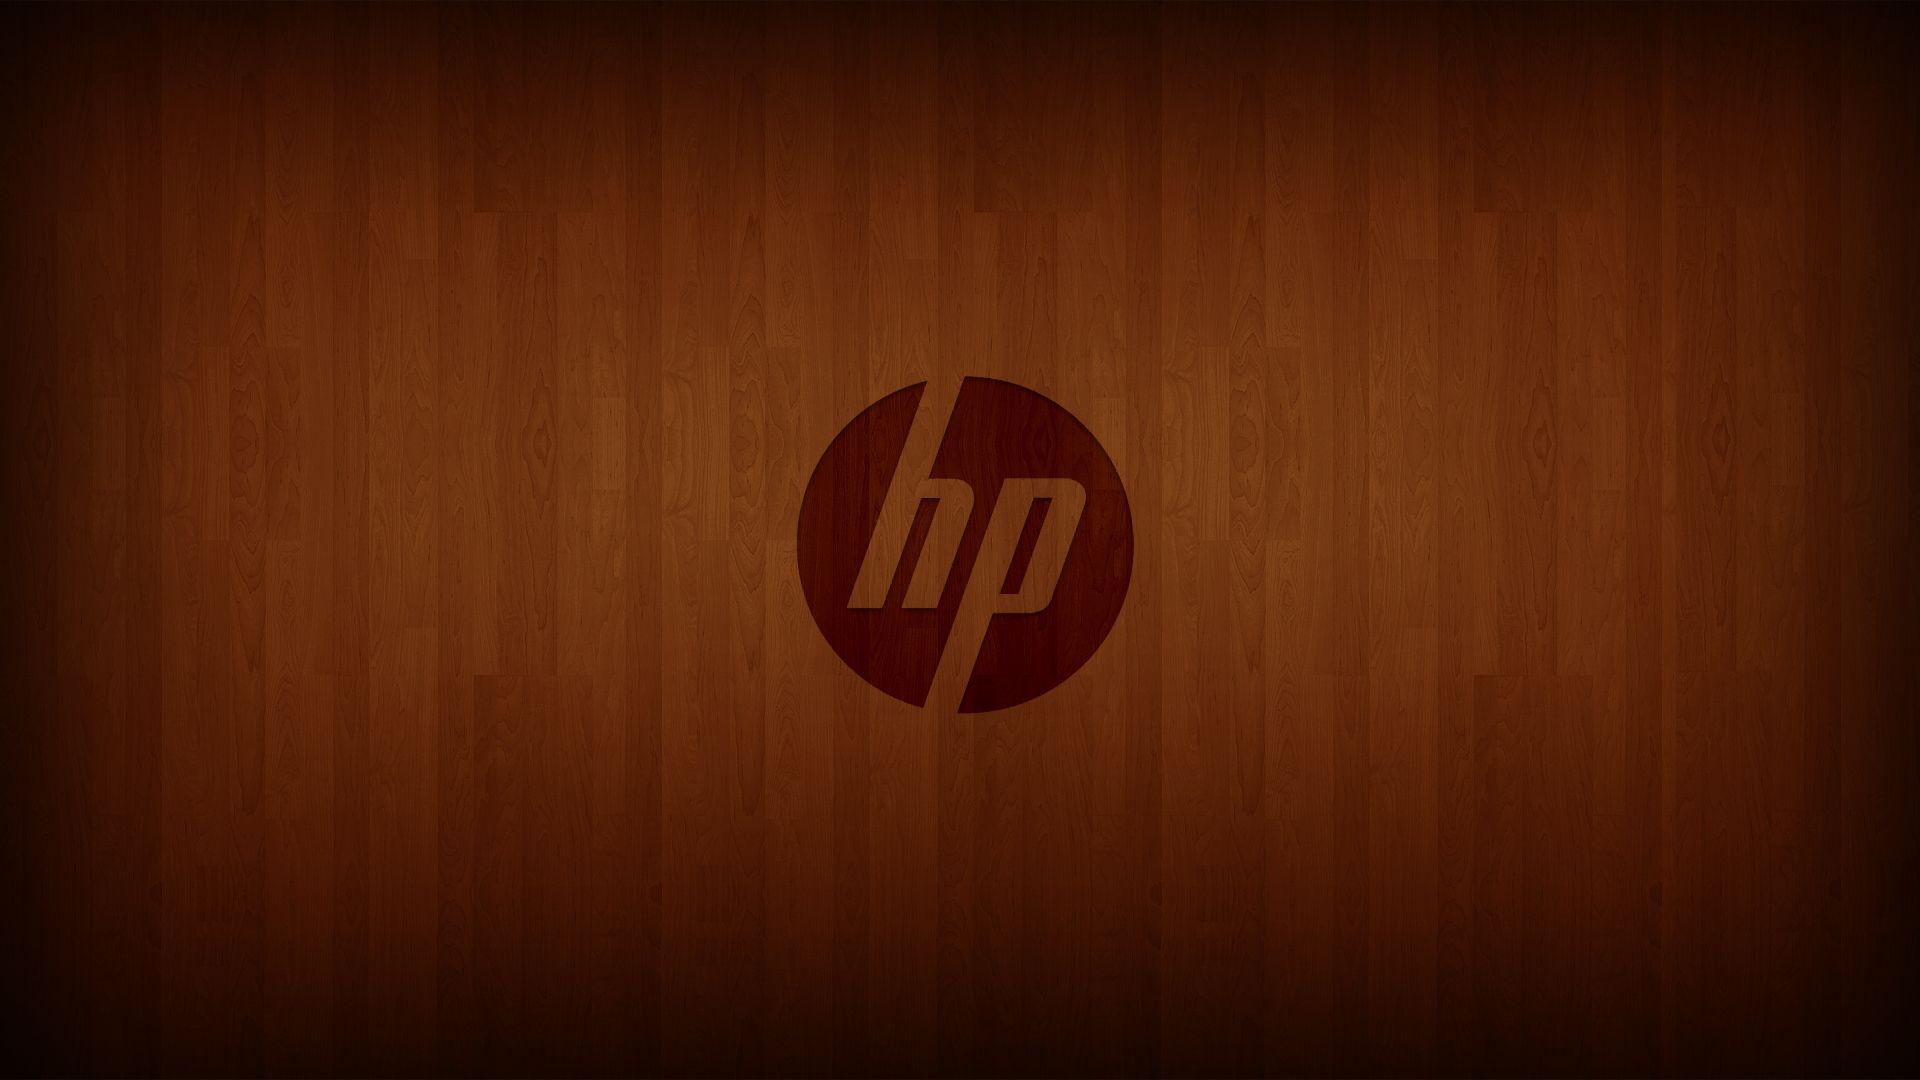 Clear HP Logo - Pin by Dougles Chan on Wallpaper for Laptops in 2019 | Laptop ...